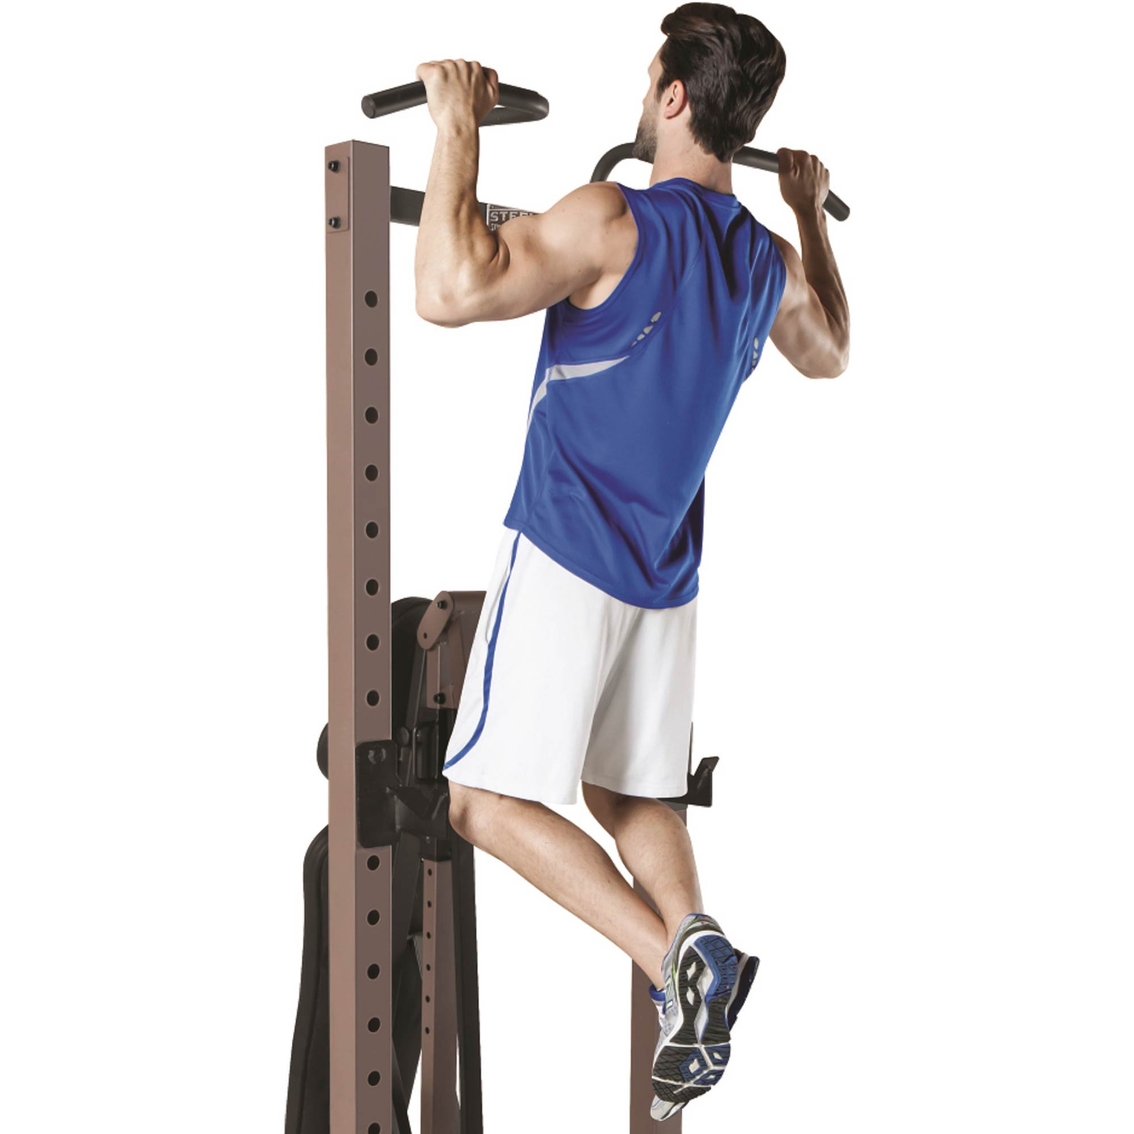 Steel Body Power Tower Plus Fold Up Bench - Image 4 of 4